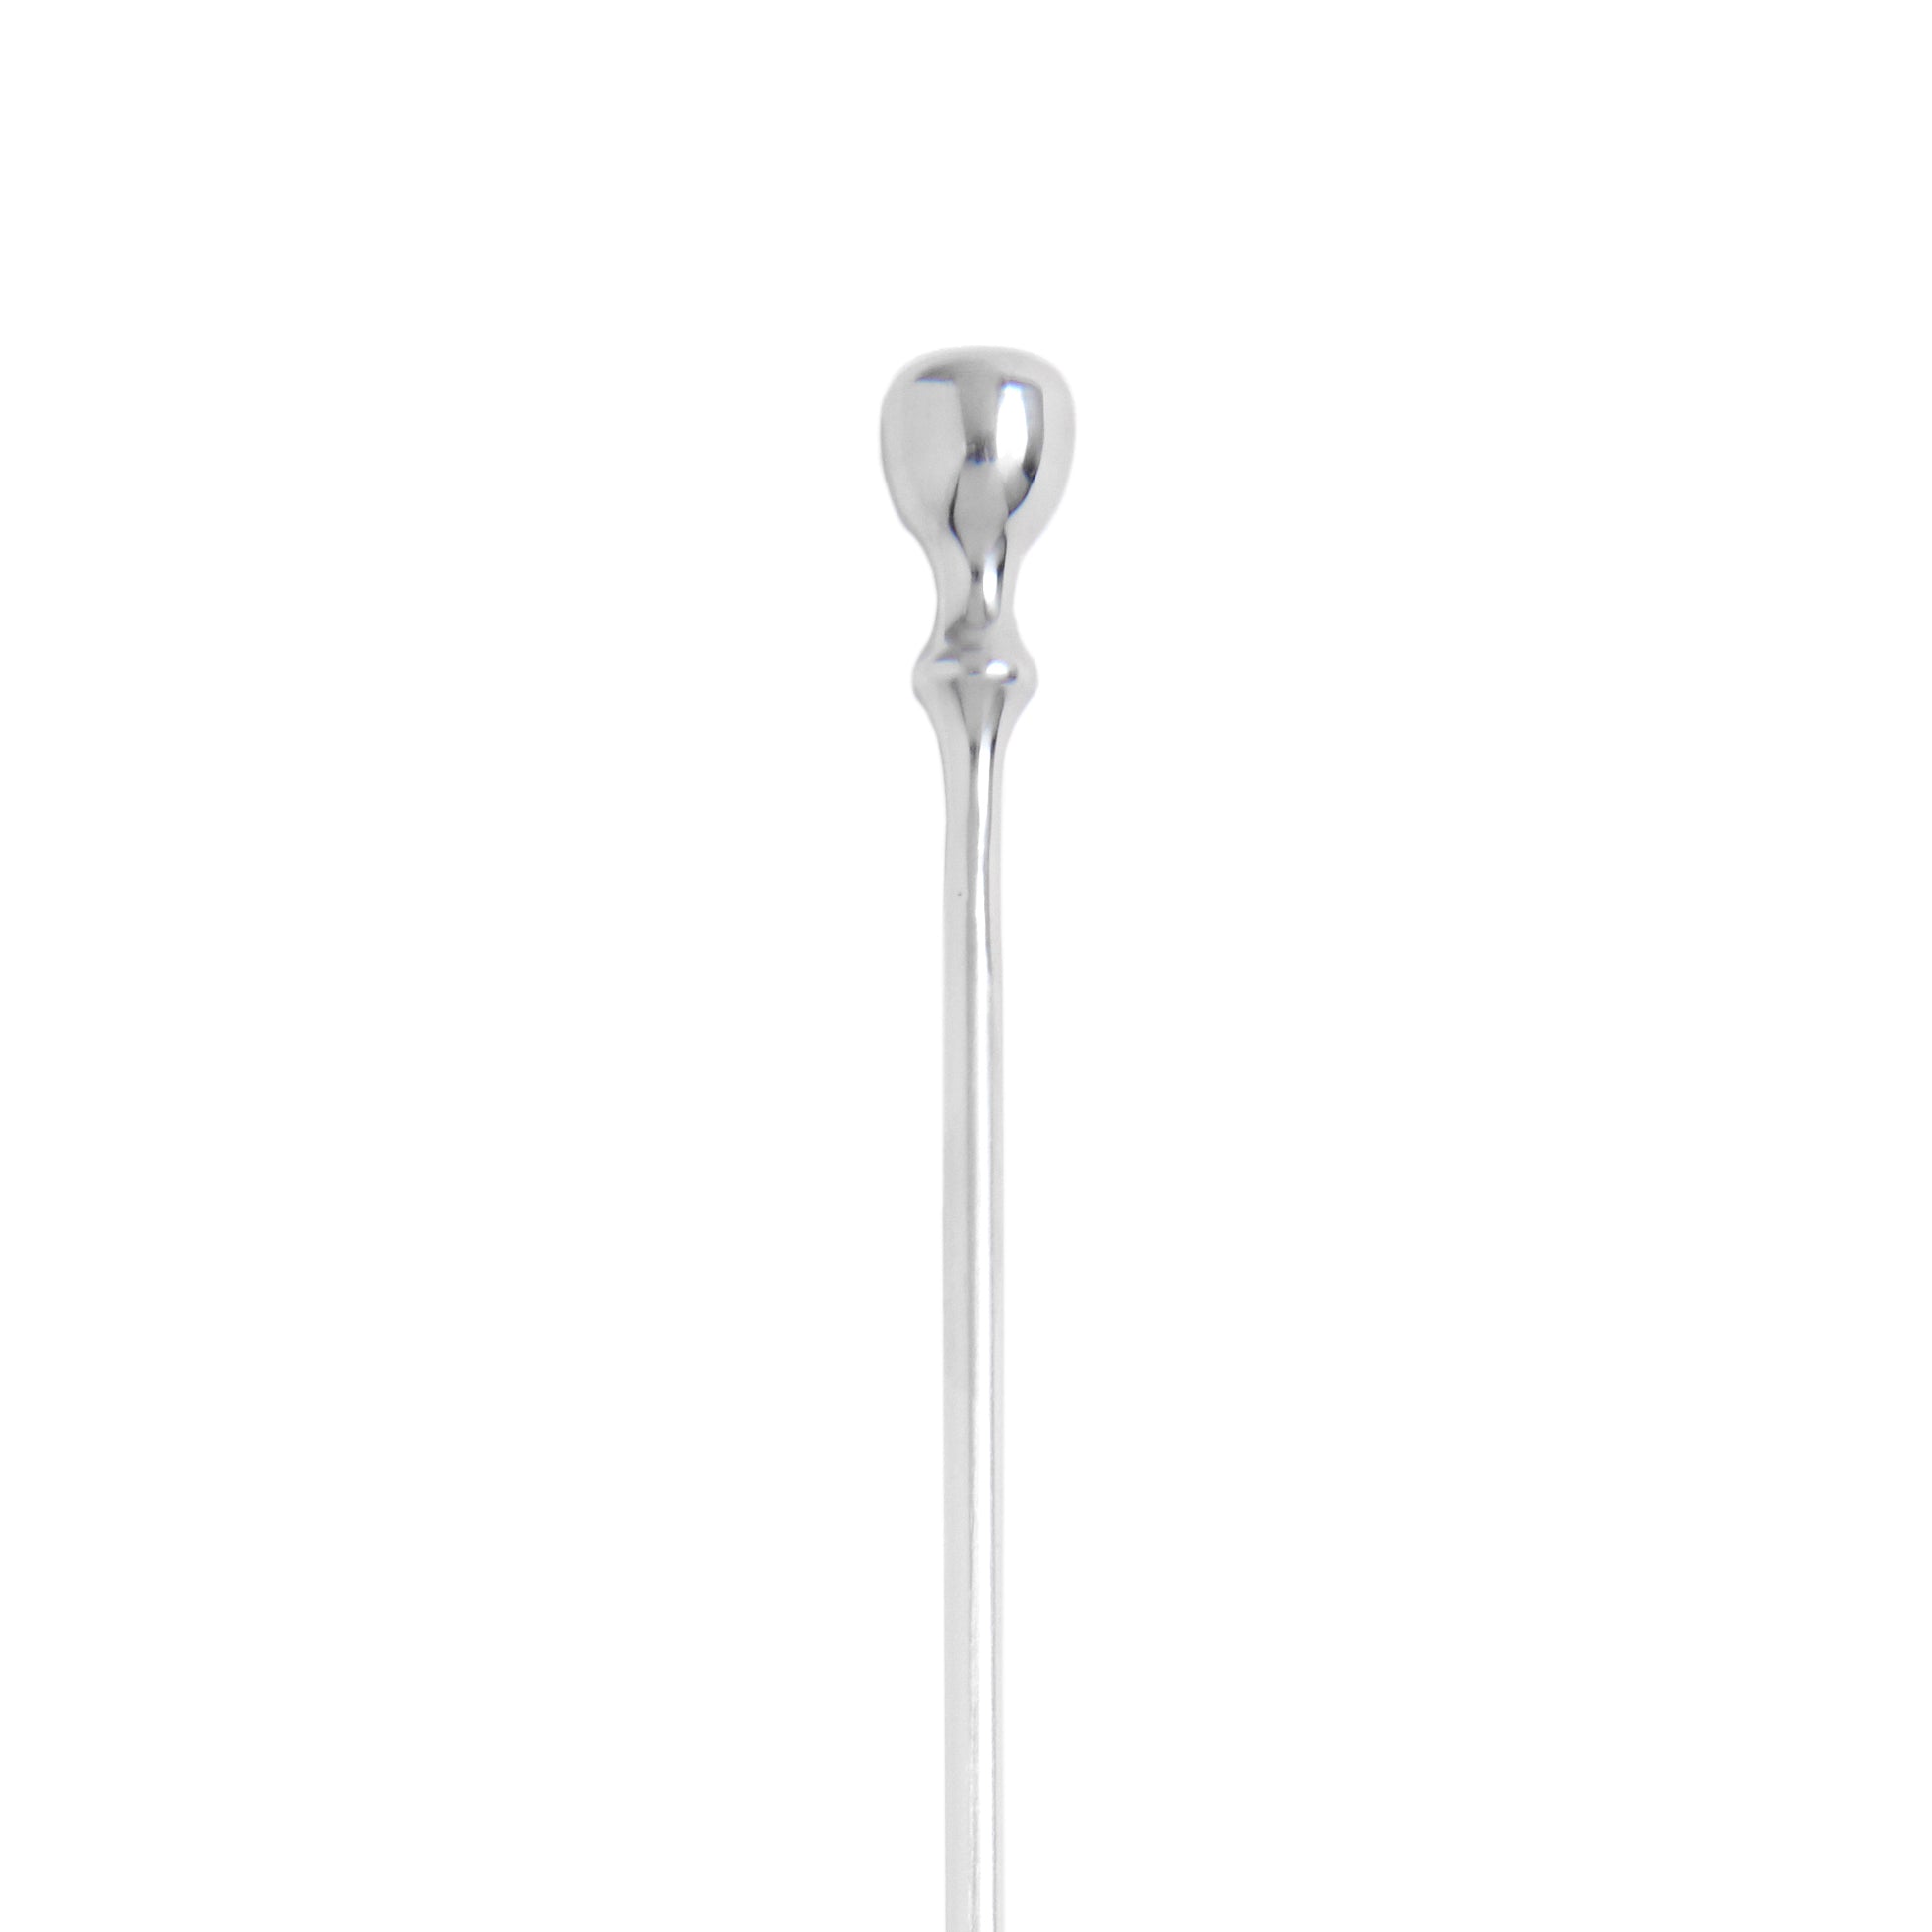 LEOPOLD® BARSPOON / STAINLESS STEEL / 36cm